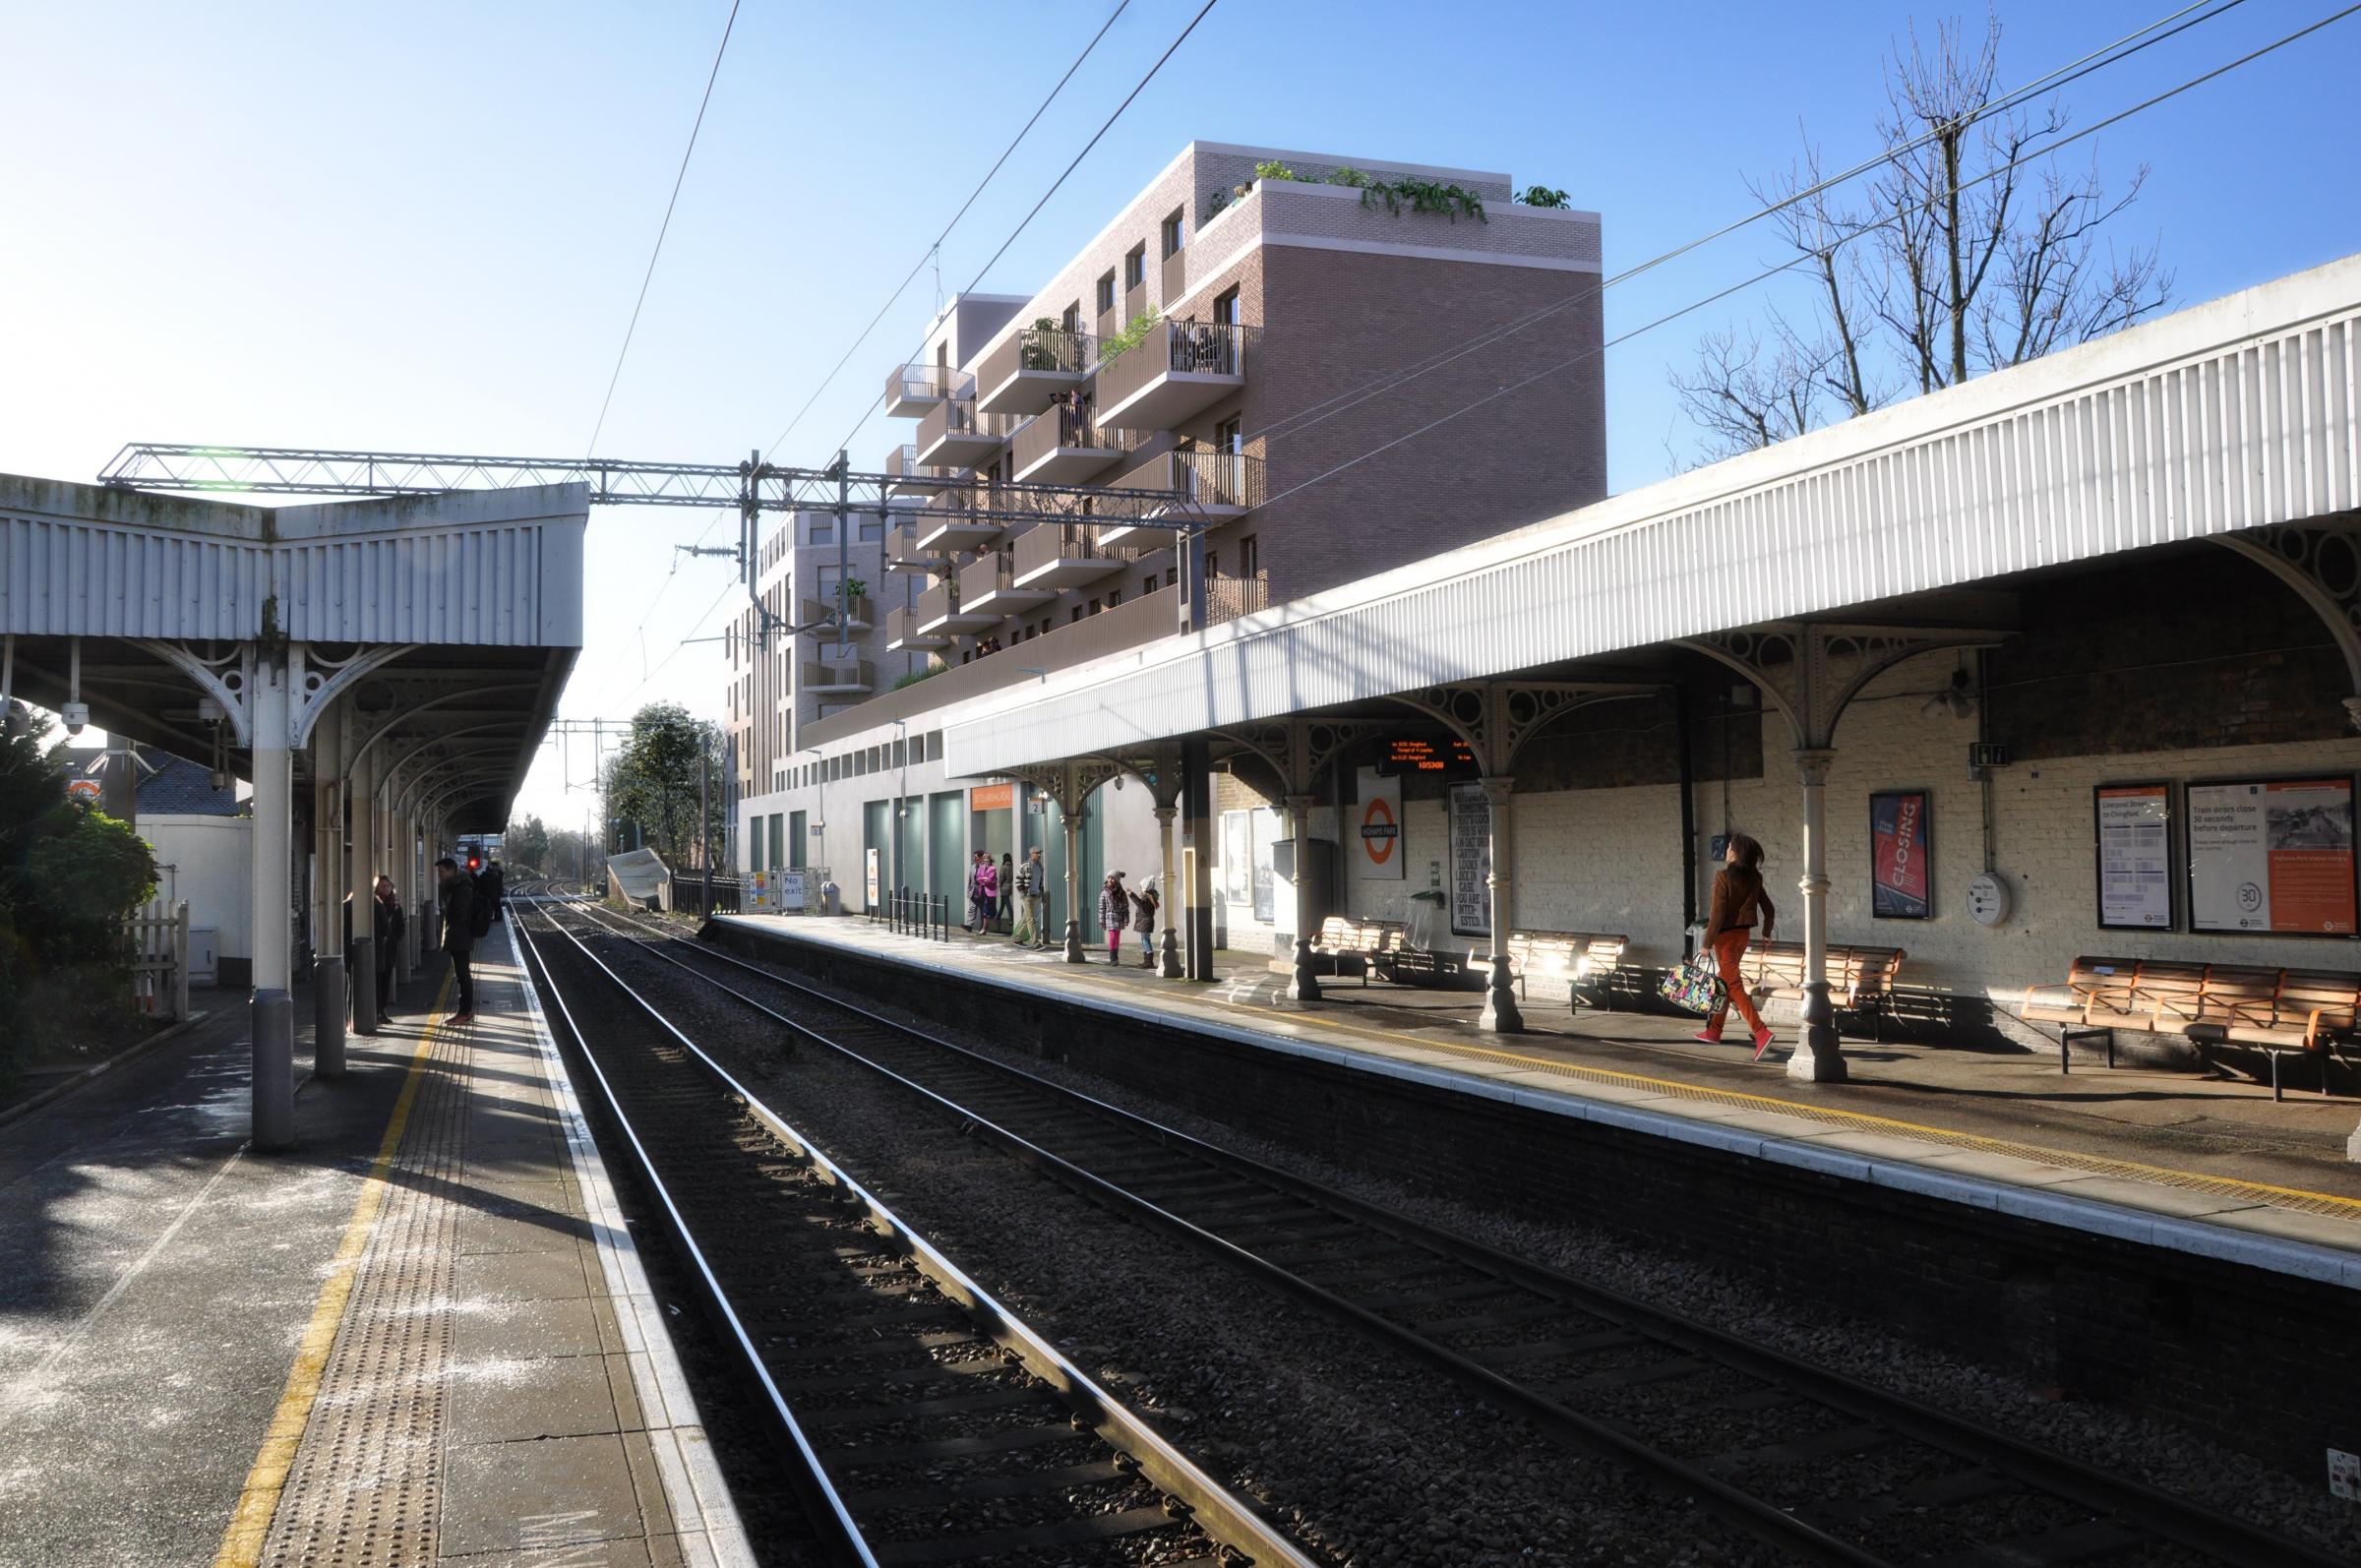 An artist\s impression of the proposed development from Highams Park station platform. Image: Stephen Davy Peter Smith Architects